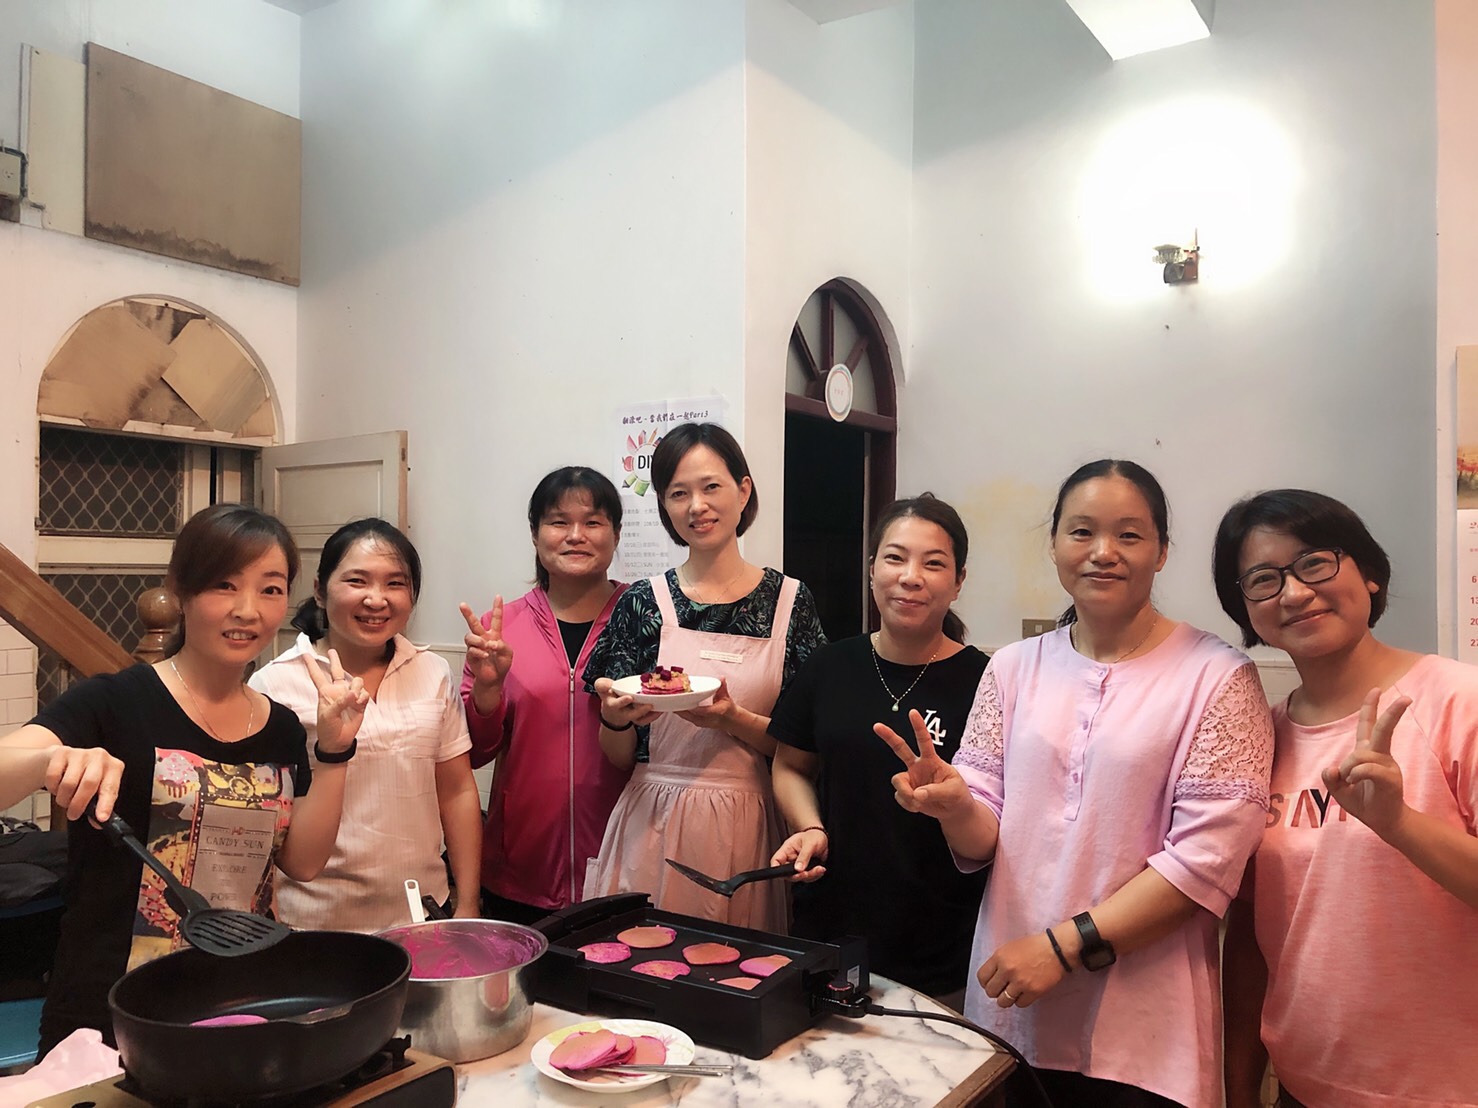 Group baking classes and various special classes invited mothers from new immigrant families to participate in. (Photo / Provided by the Lin hui Jun)